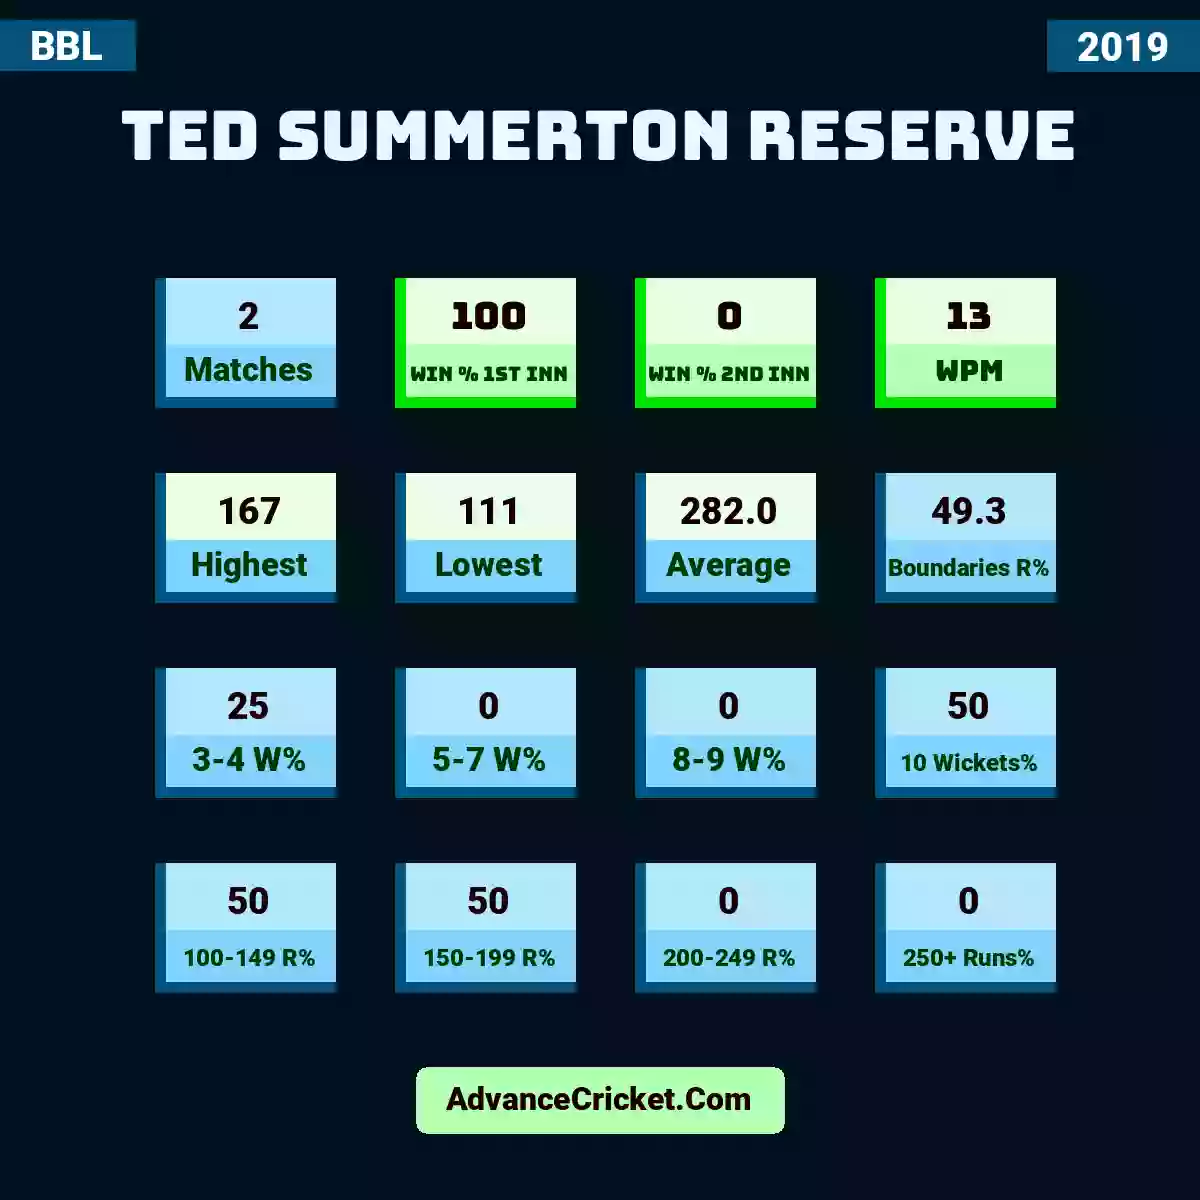 Image showing Ted Summerton Reserve with Matches: 2, Win % 1st Inn: 100, Win % 2nd Inn: 0, WPM: 13, Highest: 167, Lowest: 111, Average: 282.0, Boundaries R%: 49.3, 3-4 W%: 25, 5-7 W%: 0, 8-9 W%: 0, 10 Wickets%: 50, 100-149 R%: 50, 150-199 R%: 50, 200-249 R%: 0, 250+ Runs%: 0.